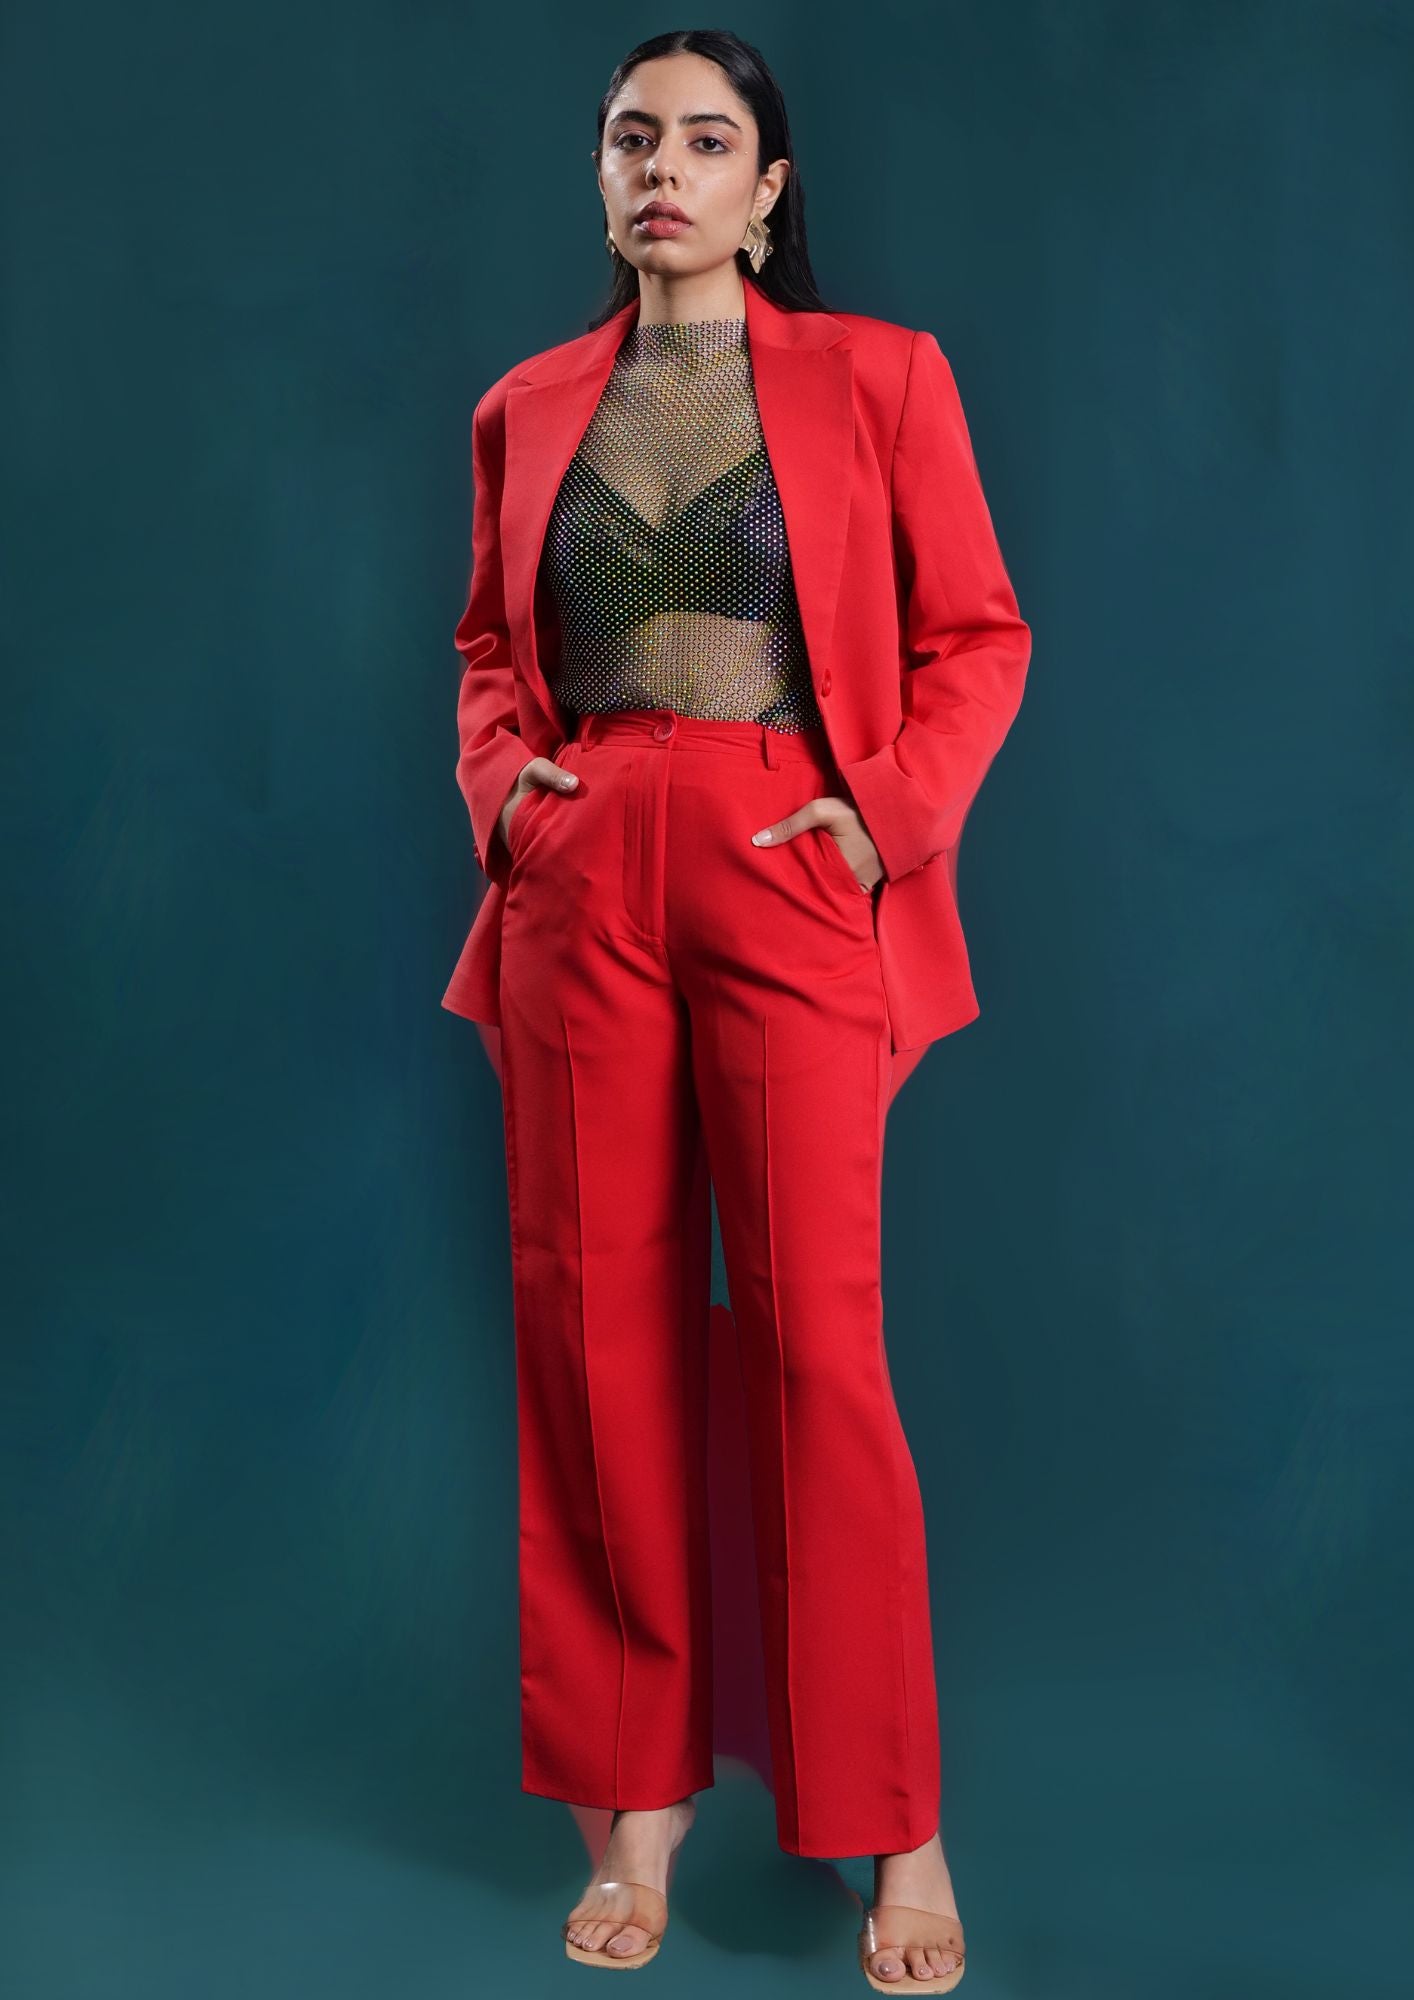 The Vivid Red Co-ord Set